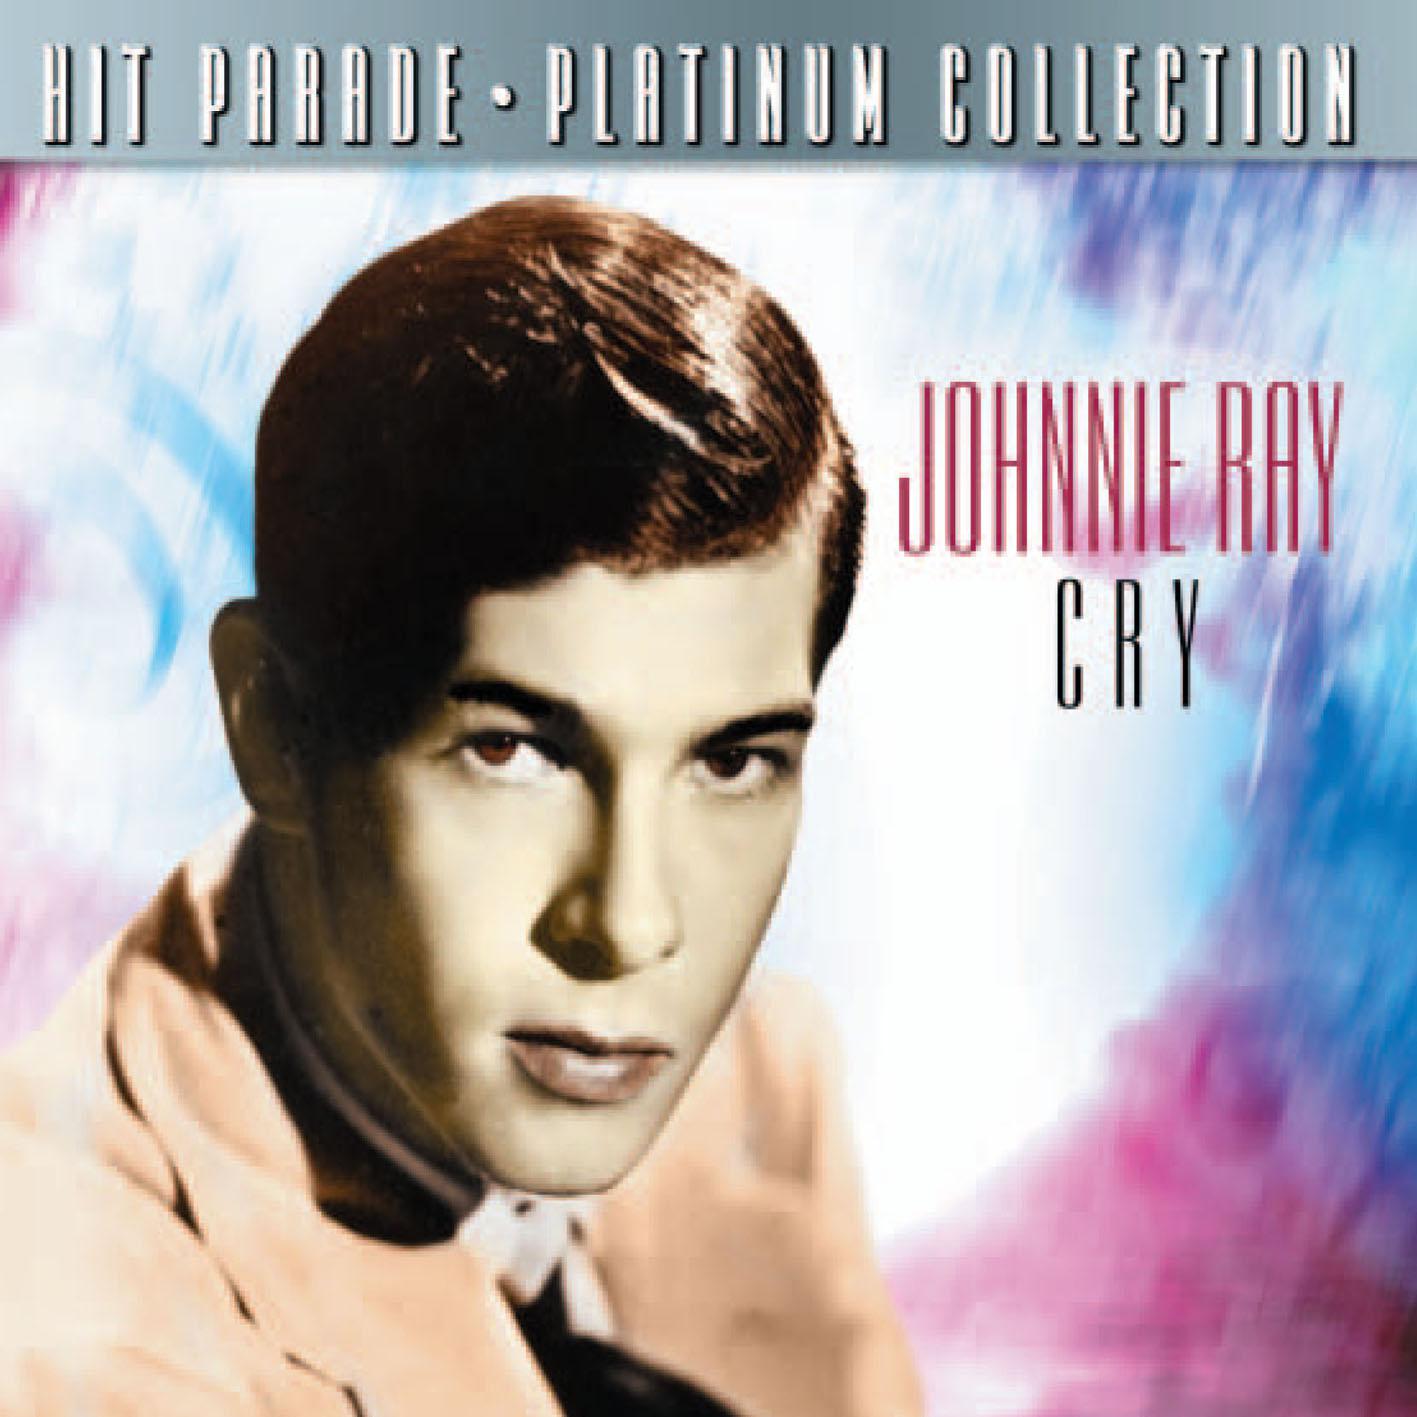 Hit Parade Platinum Collection Johnnie Ray